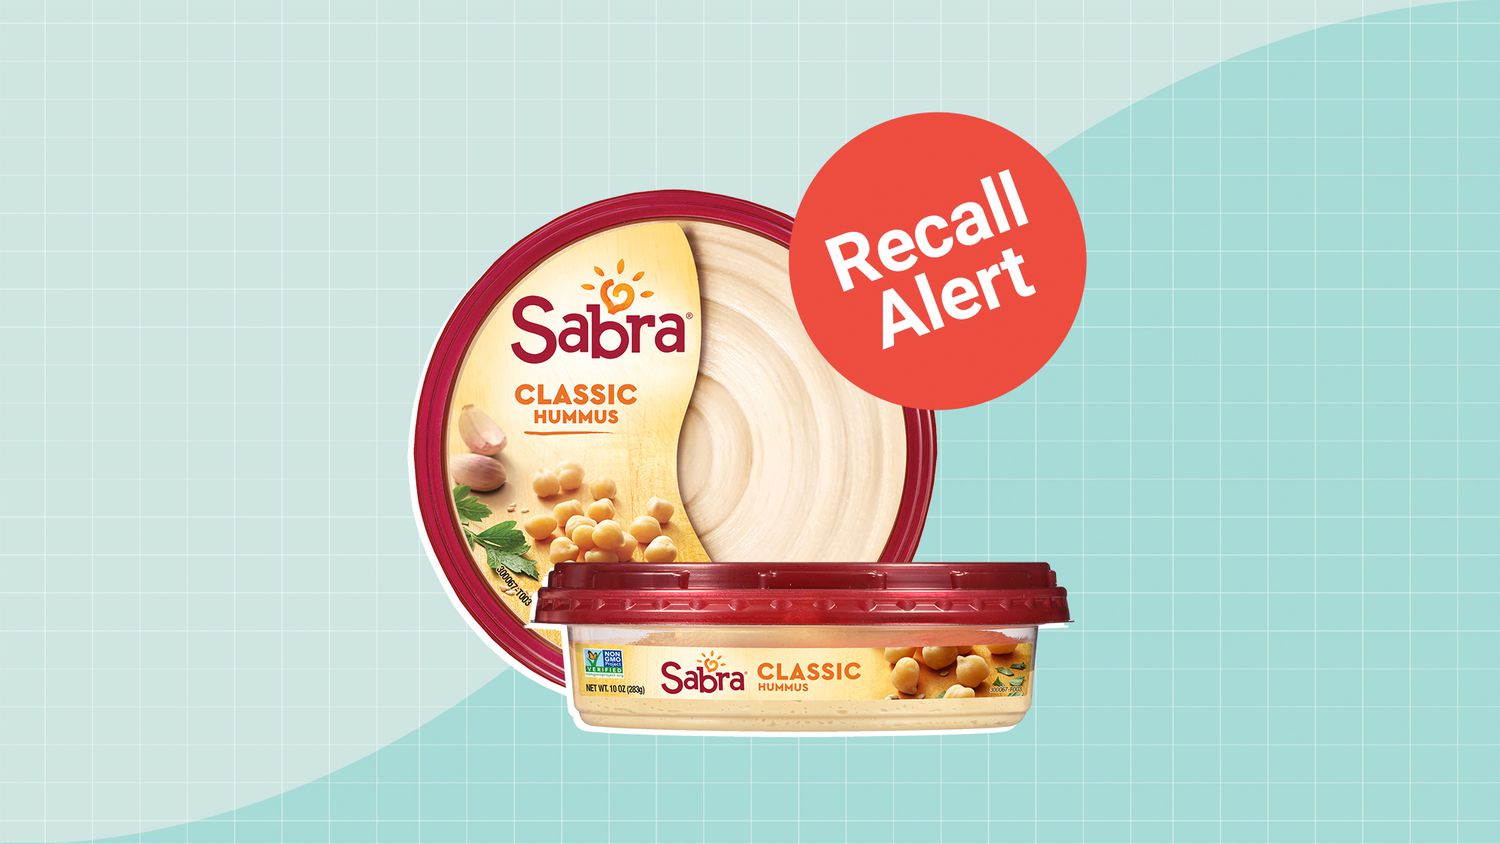 Sabra Hummus Recalled in 16 States for Potential Salmonella Contamination |  EatingWell